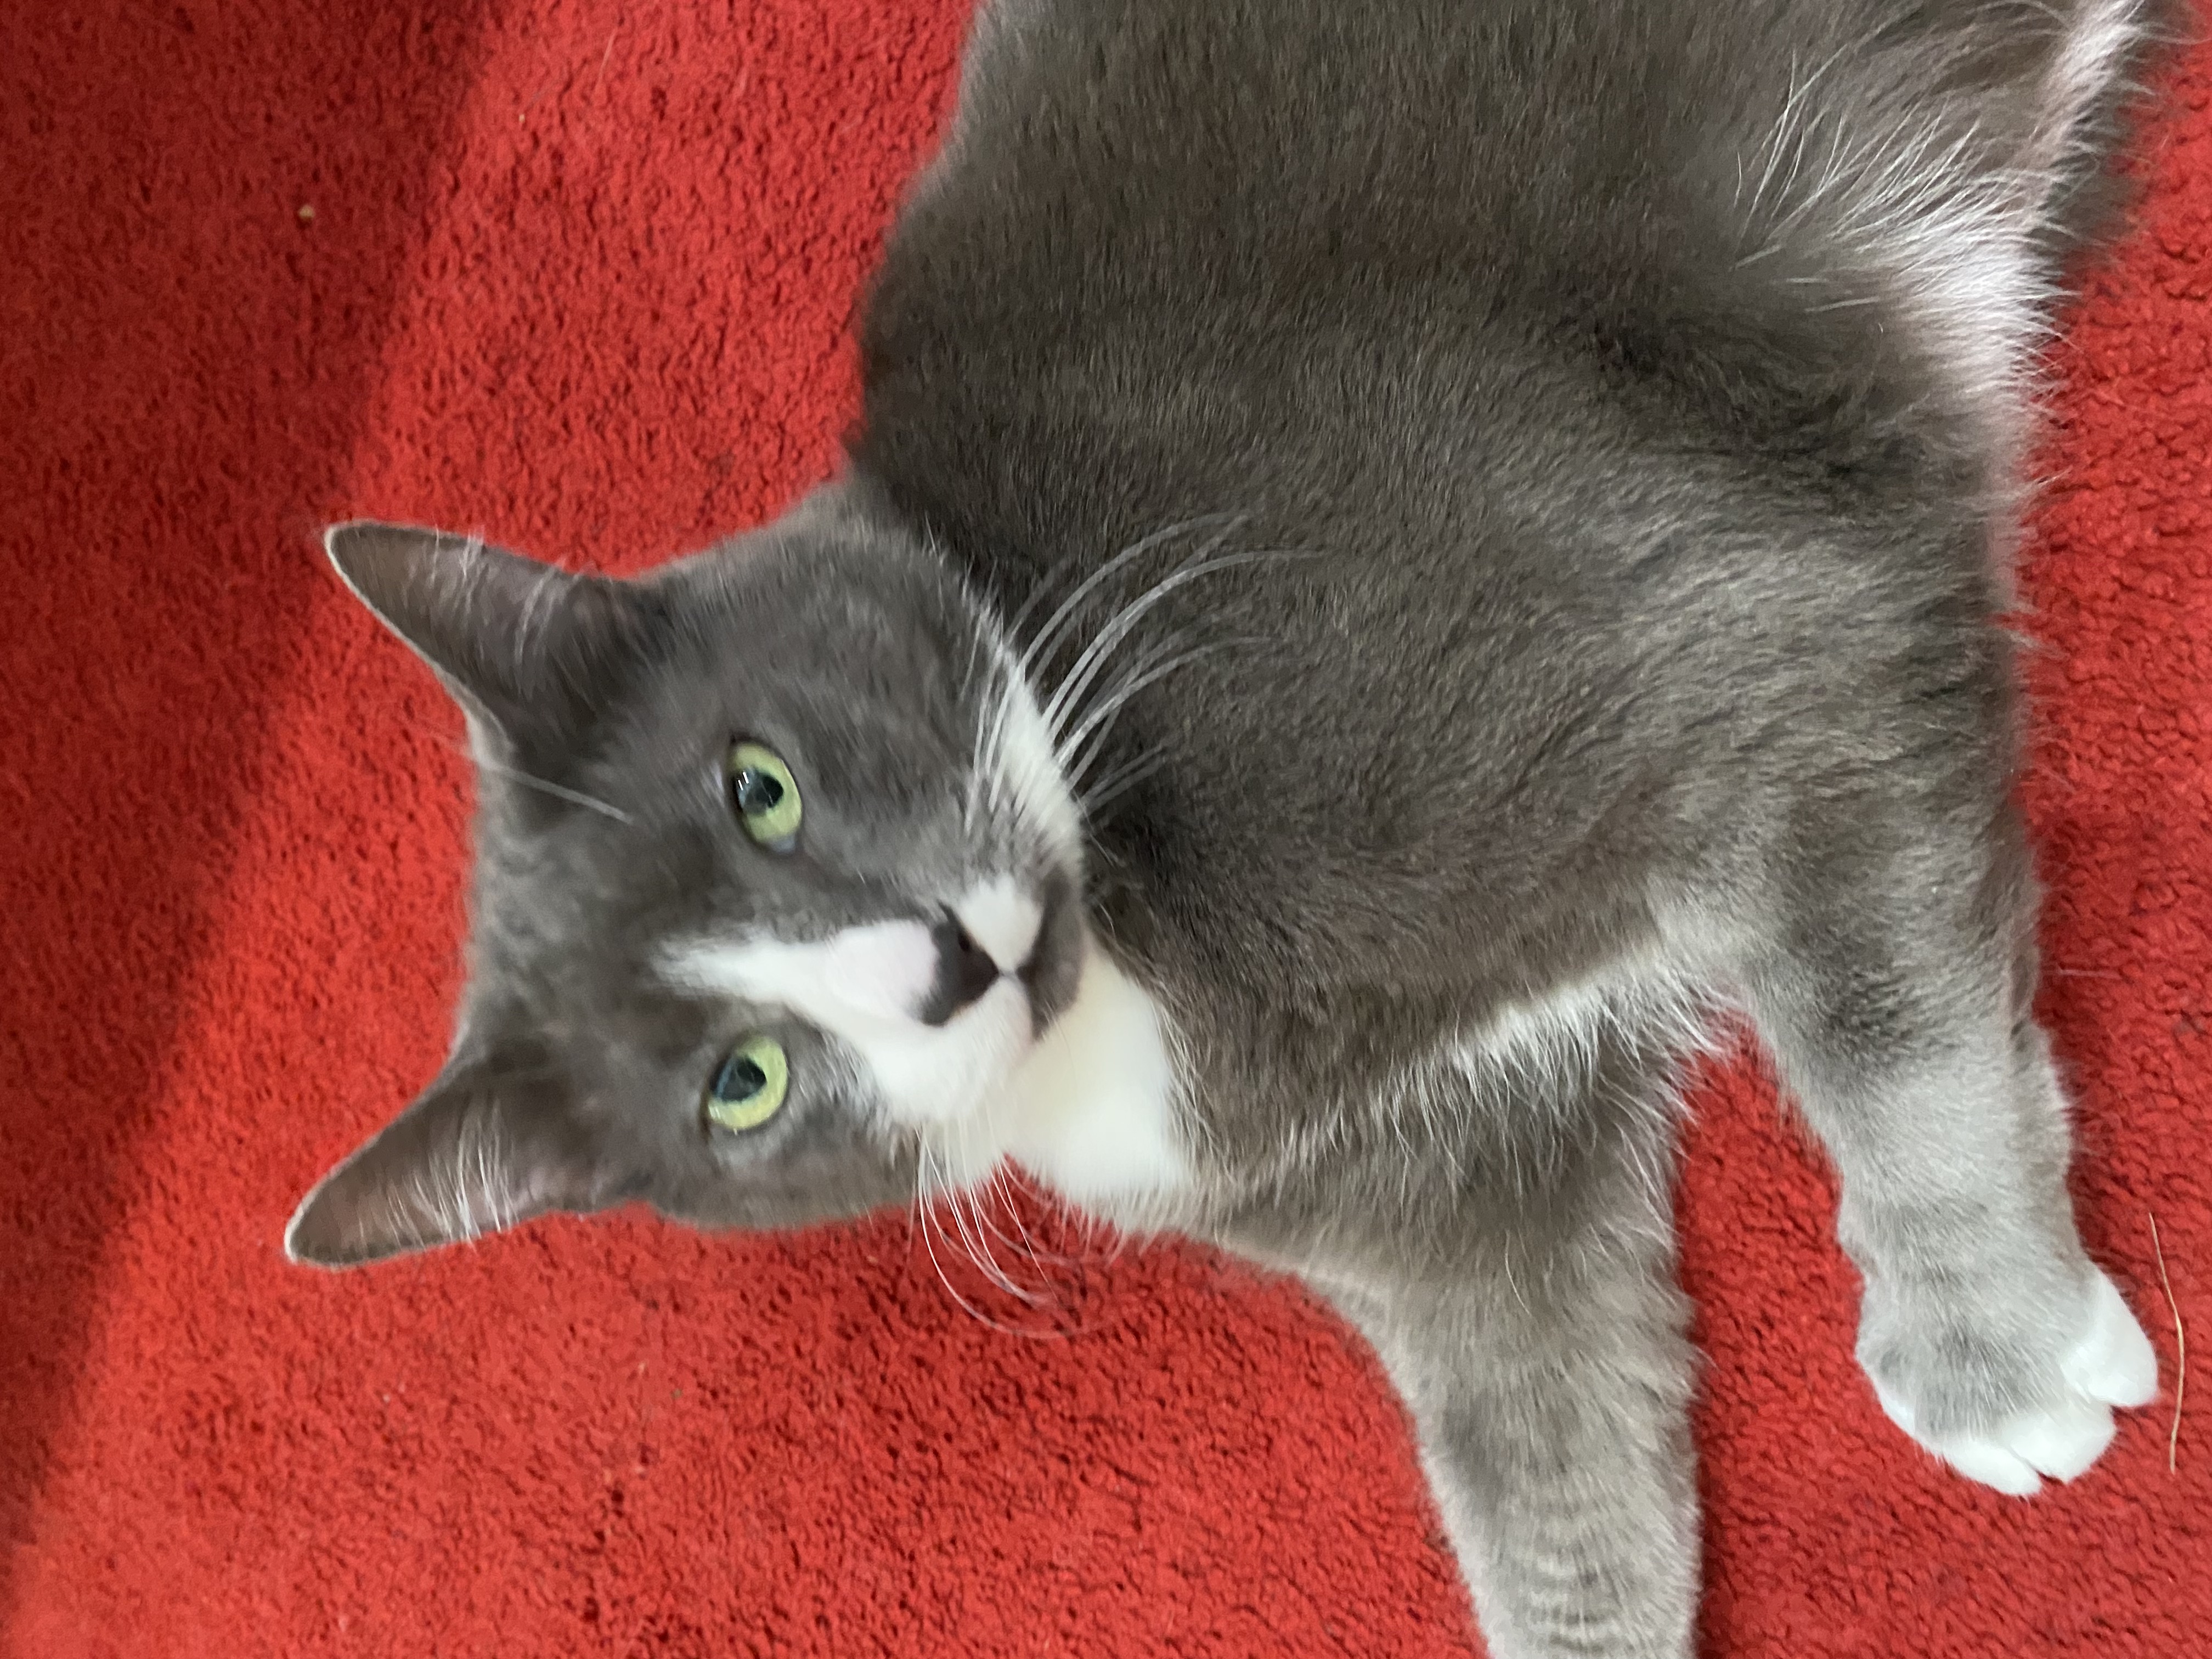 grey cat on red carpet, looking at you slightly quizzical.